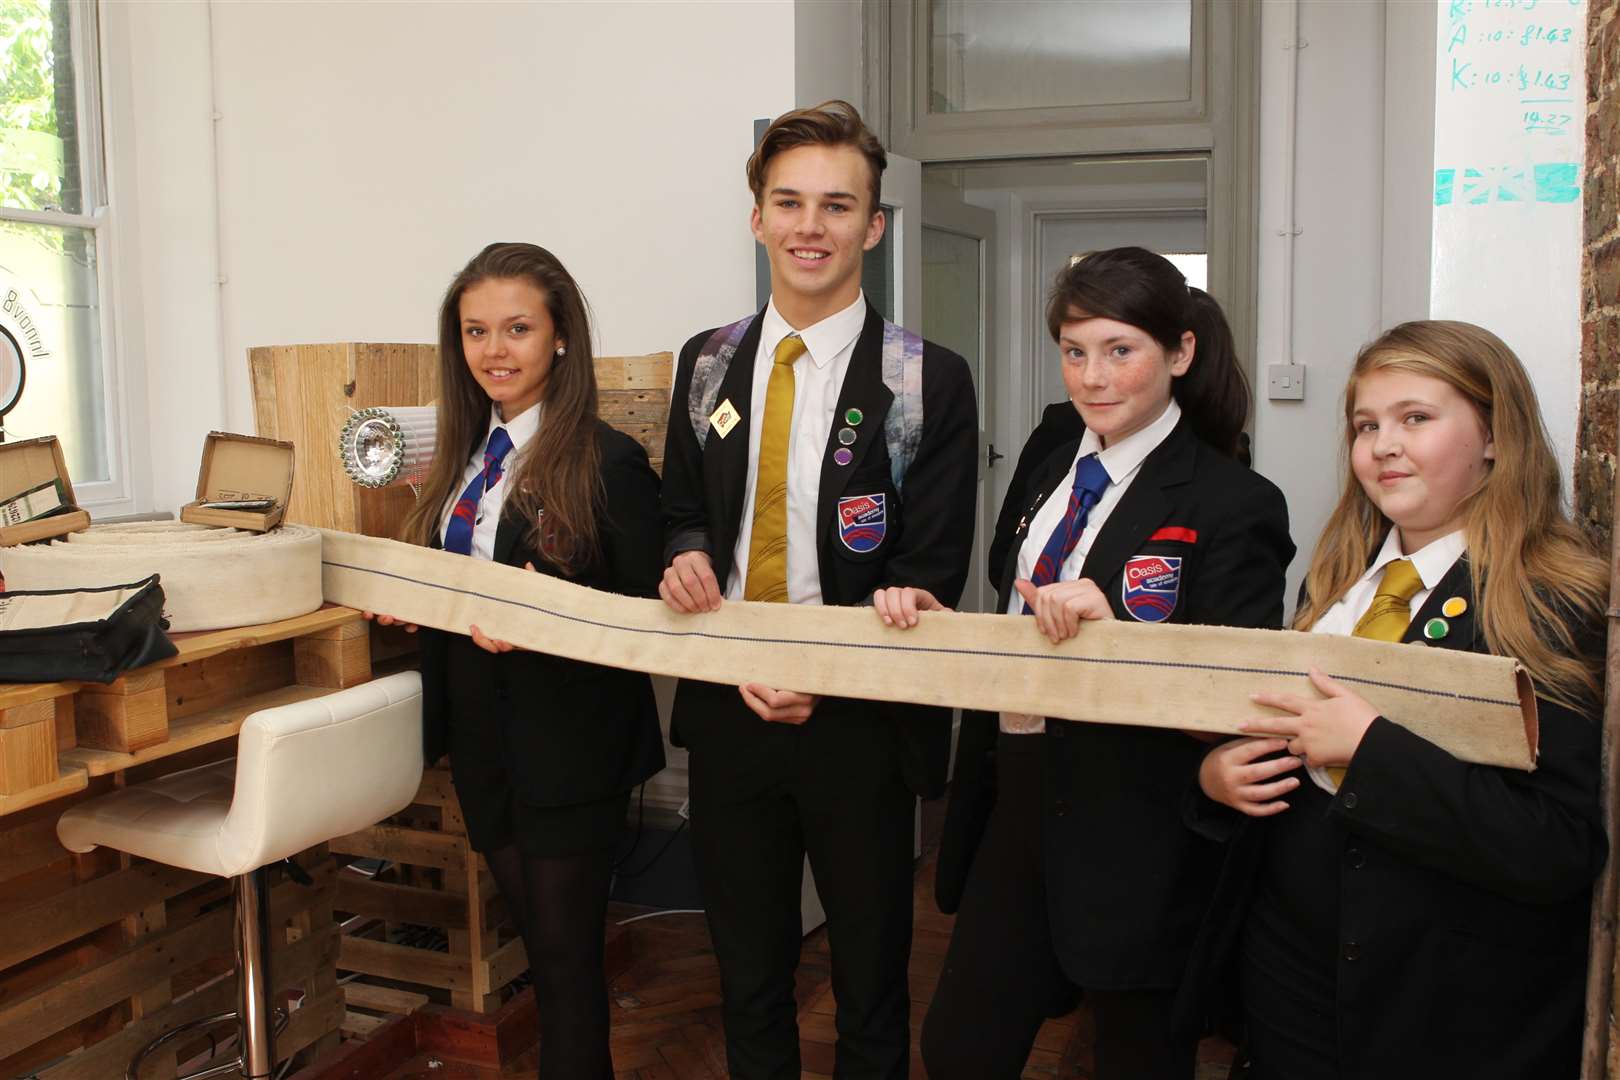 Belle Peck, 11, Oliver Cooksey, 15 Rosemary Coulstock, 12 and Natalie Tanner 12 from Oasis Academy at Recre8 to learn about up-cycling in an Apprentice style event the school is holding